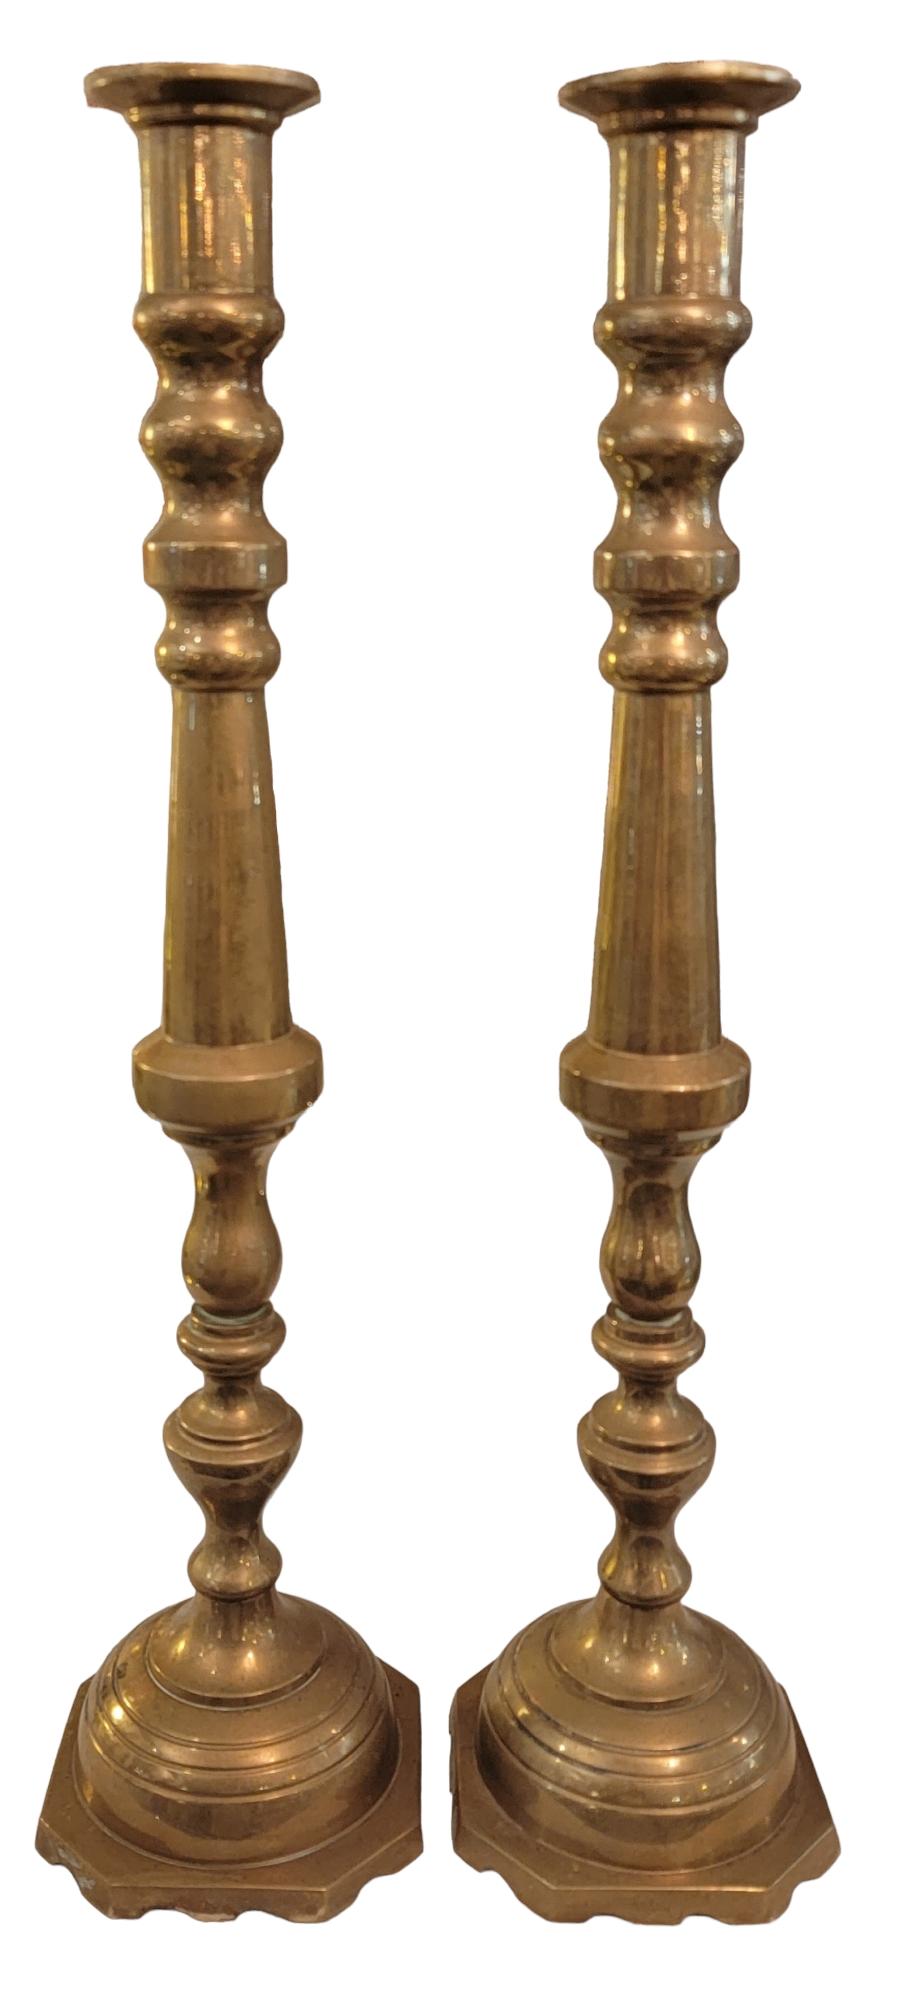 19th Century Large English Solid Brass Candle Sticks In Good Condition For Sale In Pasadena, CA